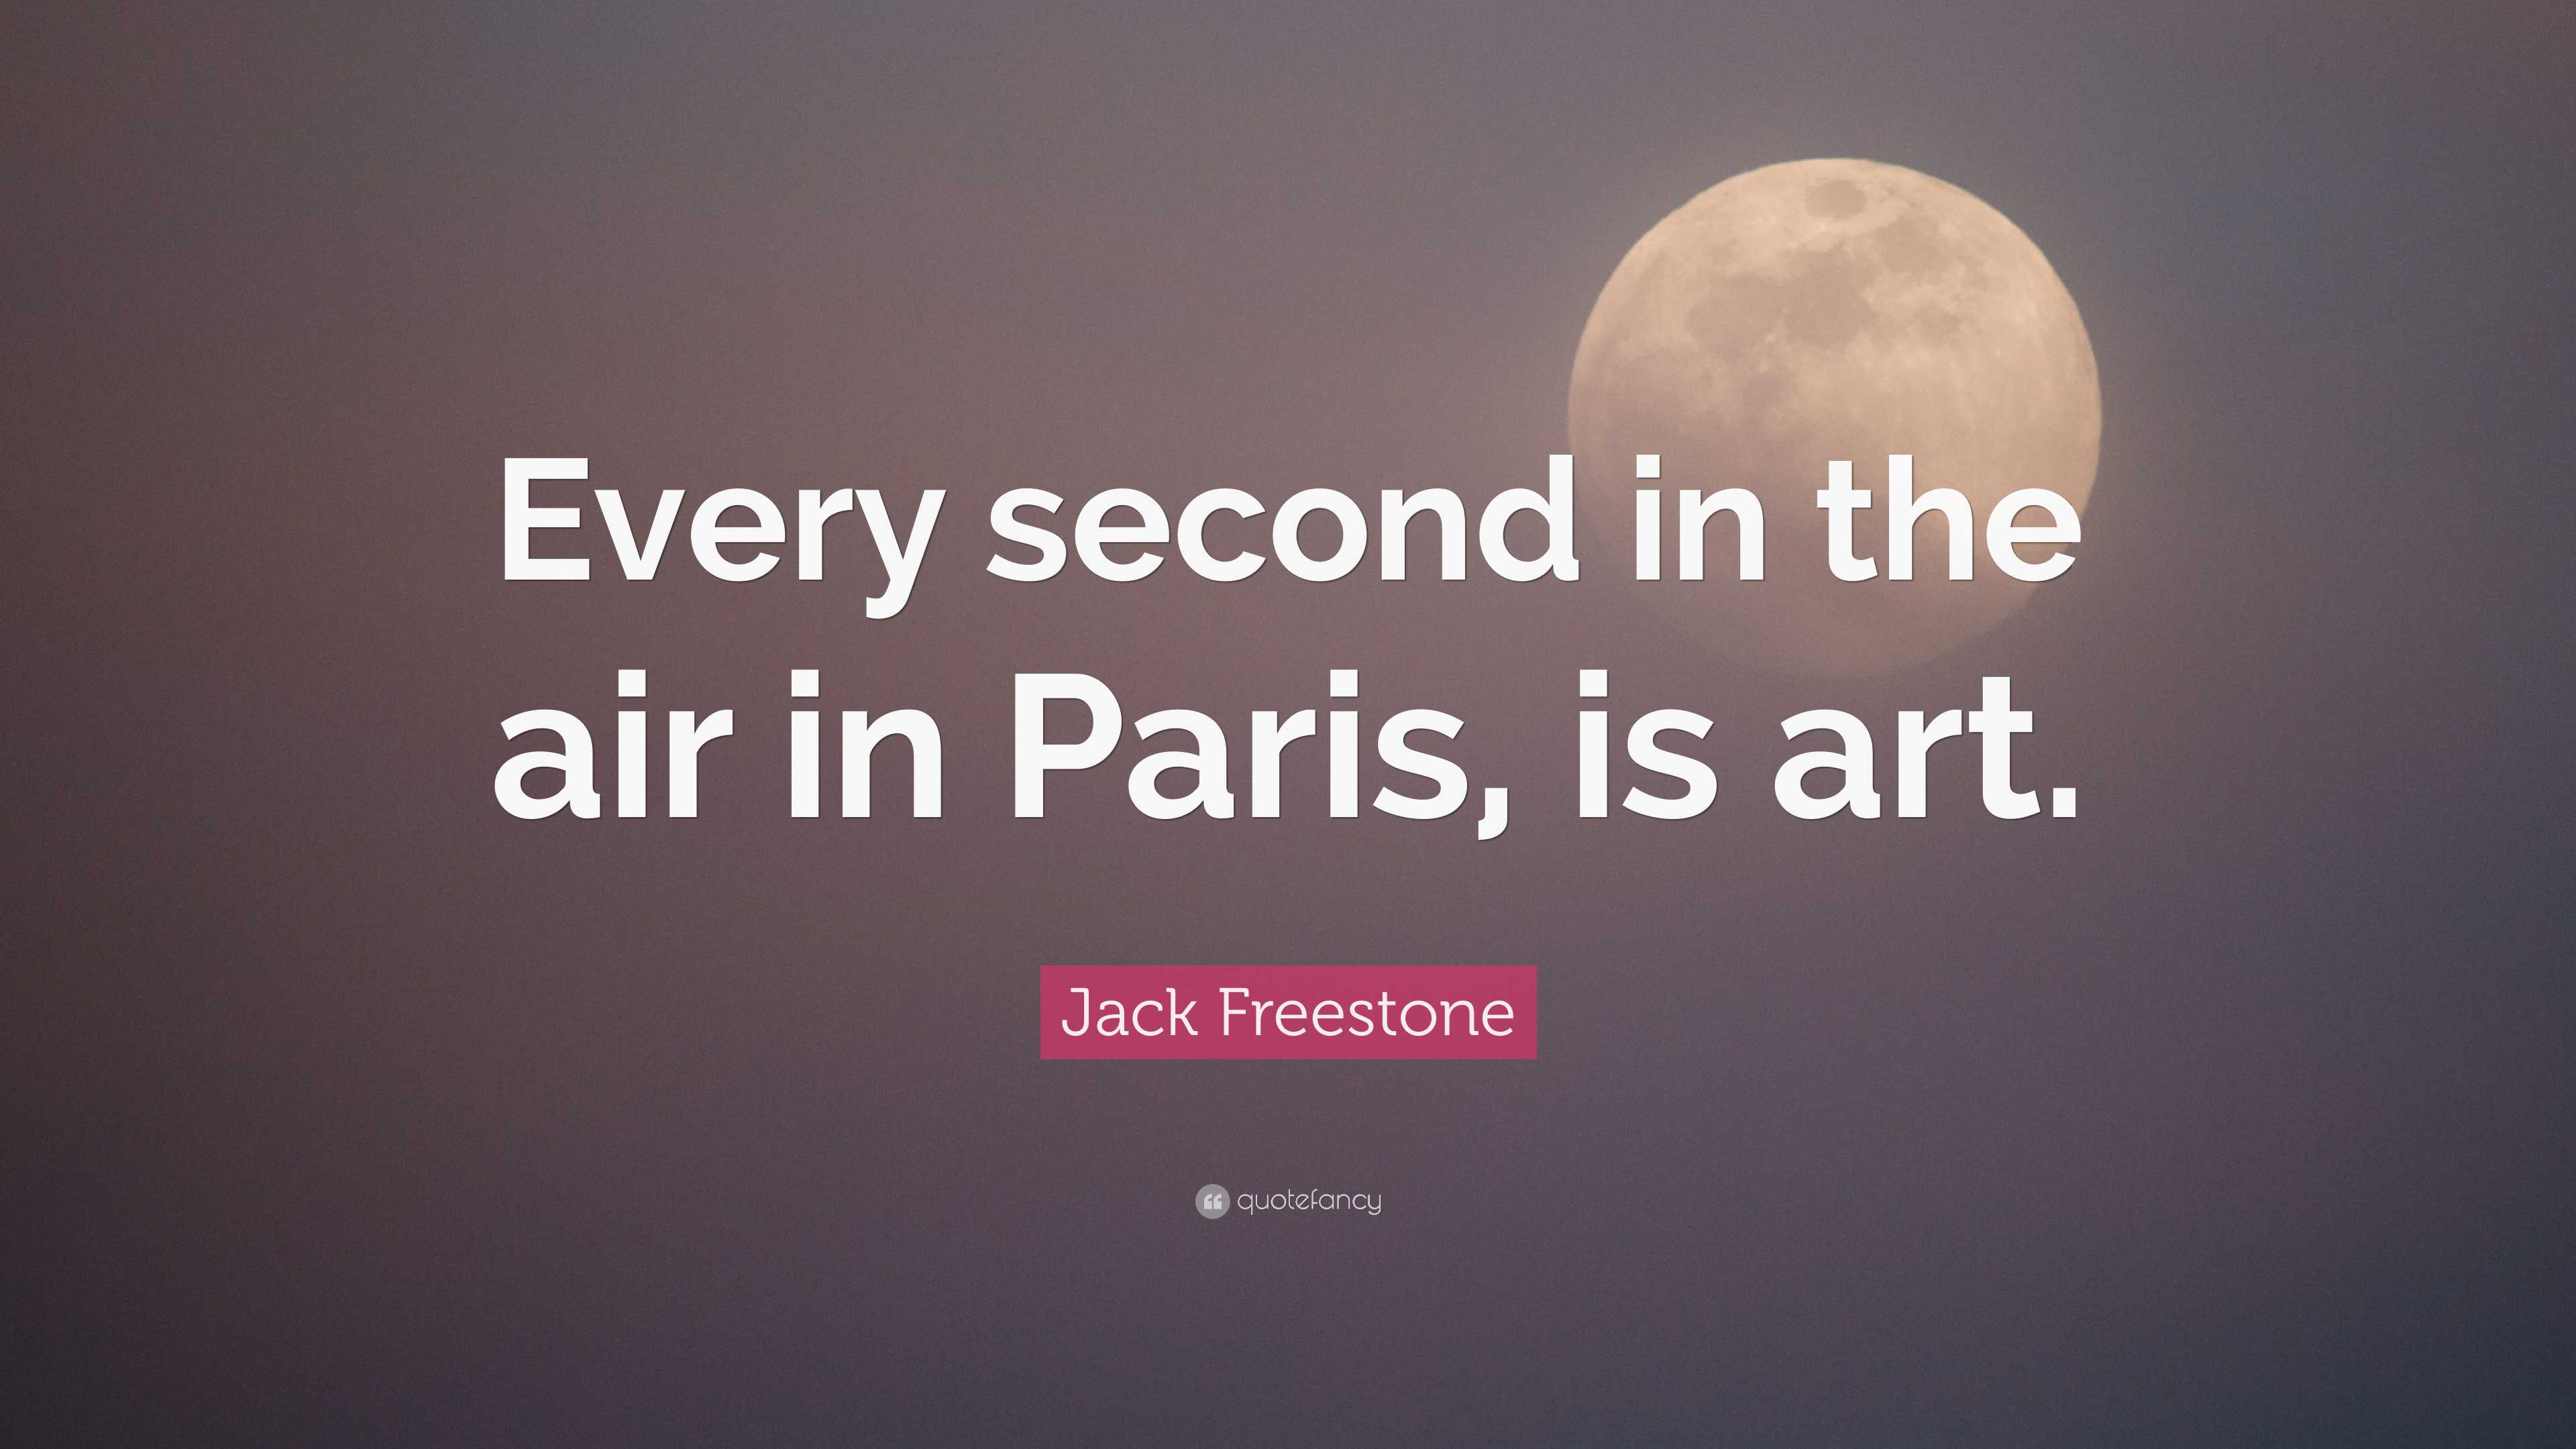 Jack Freestone Quote: “Every second in the air in Paris, is art.”